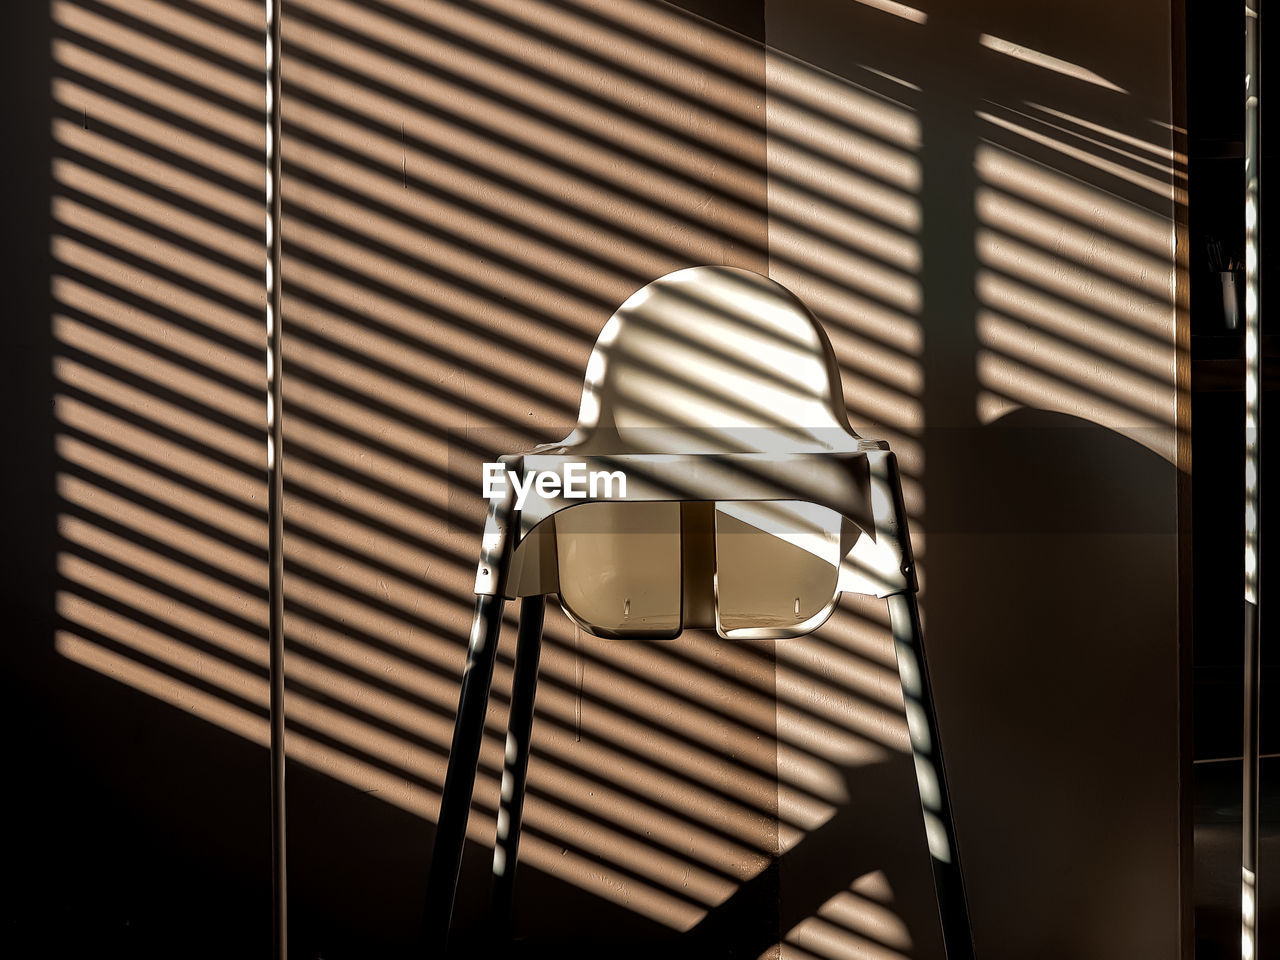 Shadows in the interior, children's chair and shadow stripes.